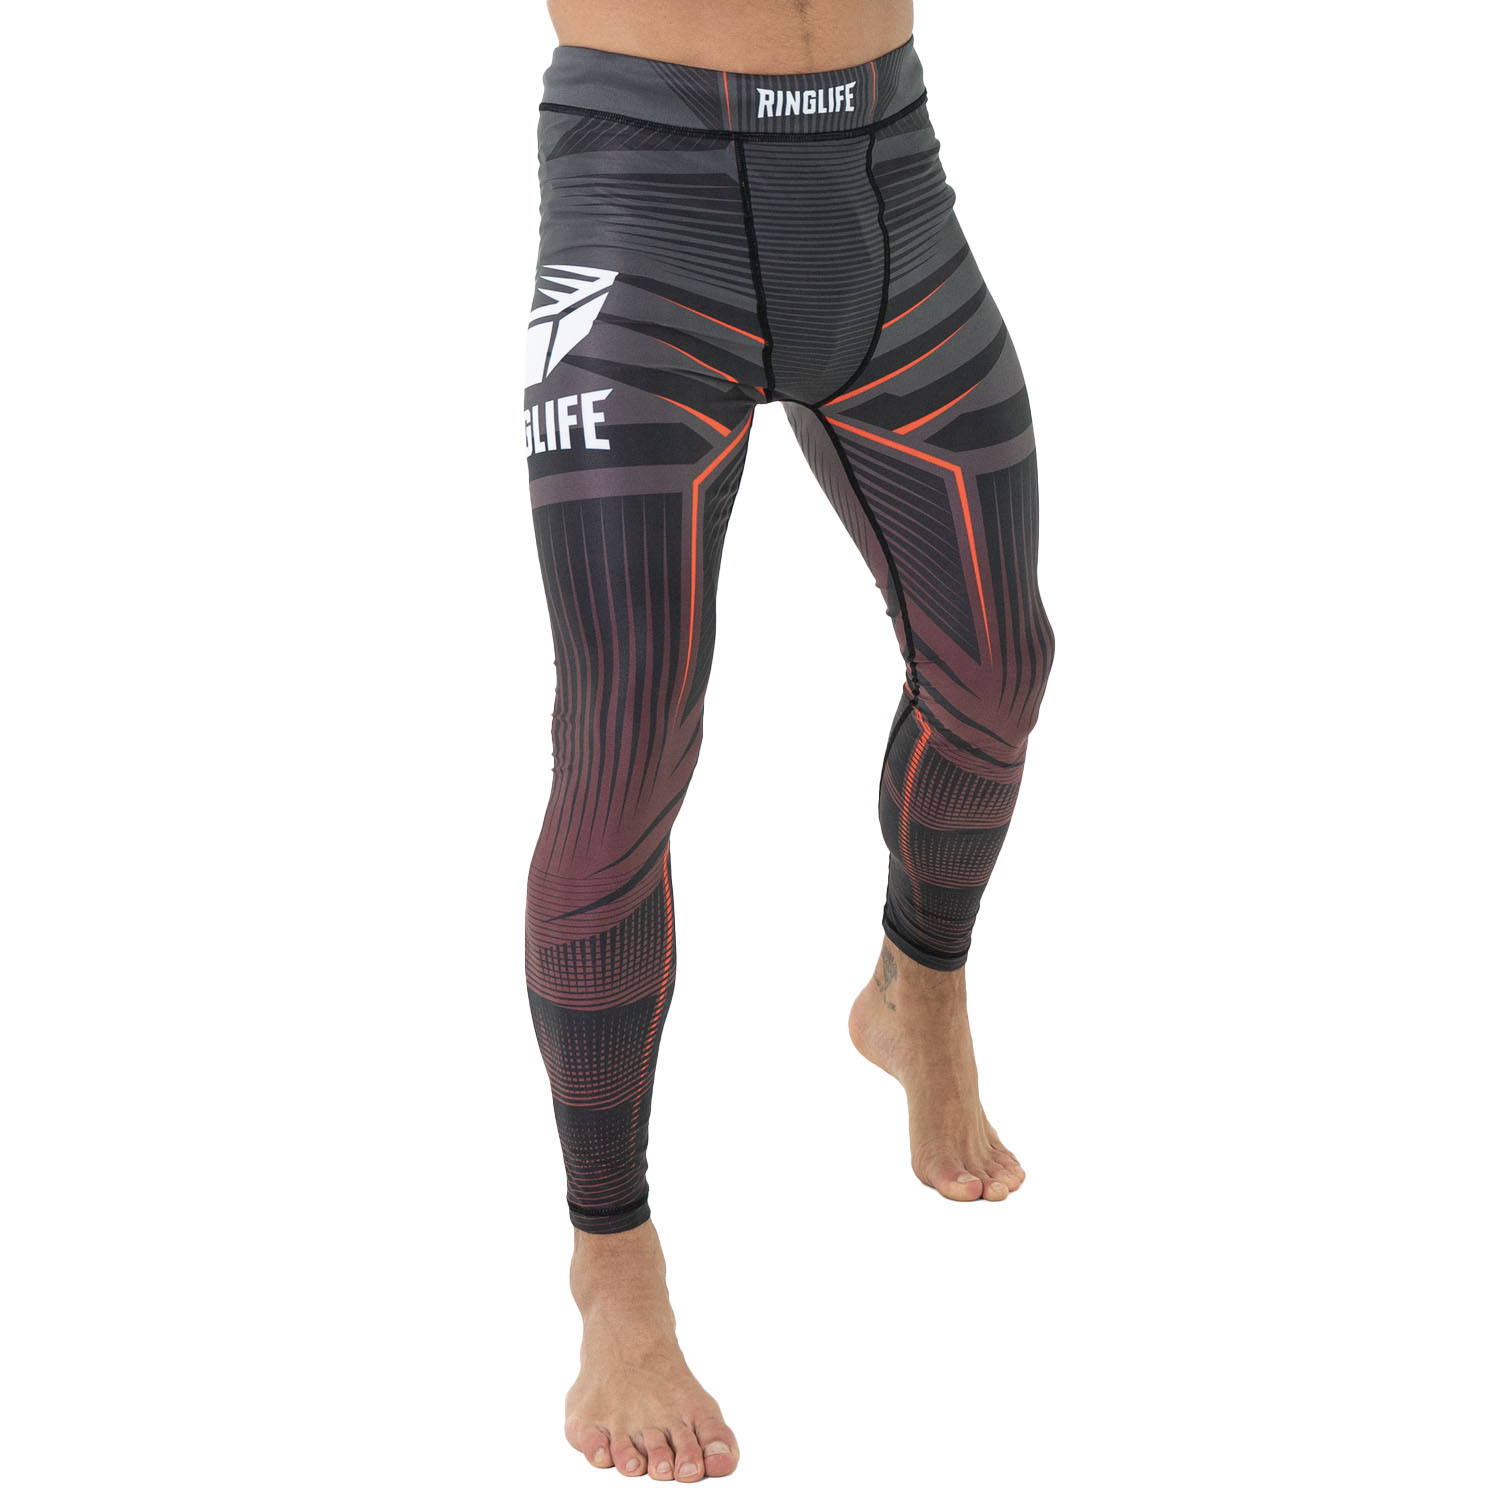 RINGLIFE Compression Pants - Octaring schwarz-rot XXL